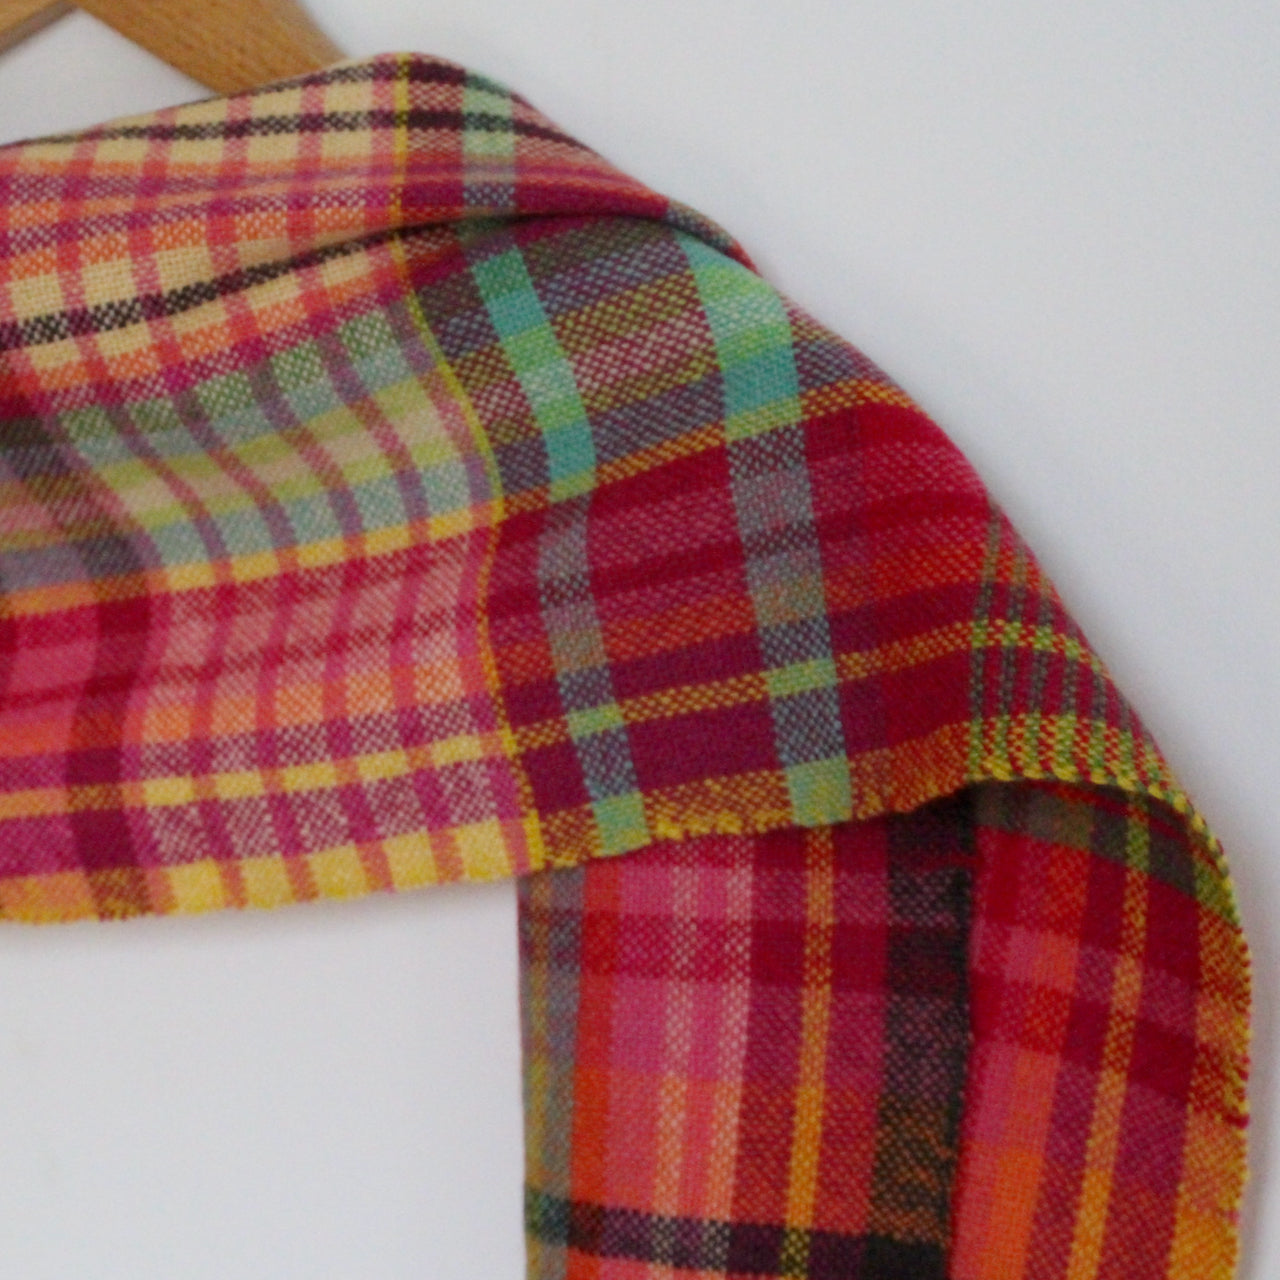 handwoven woollen scarf by Teresa Dunne Cornish weaver in red, green, orange and yellow